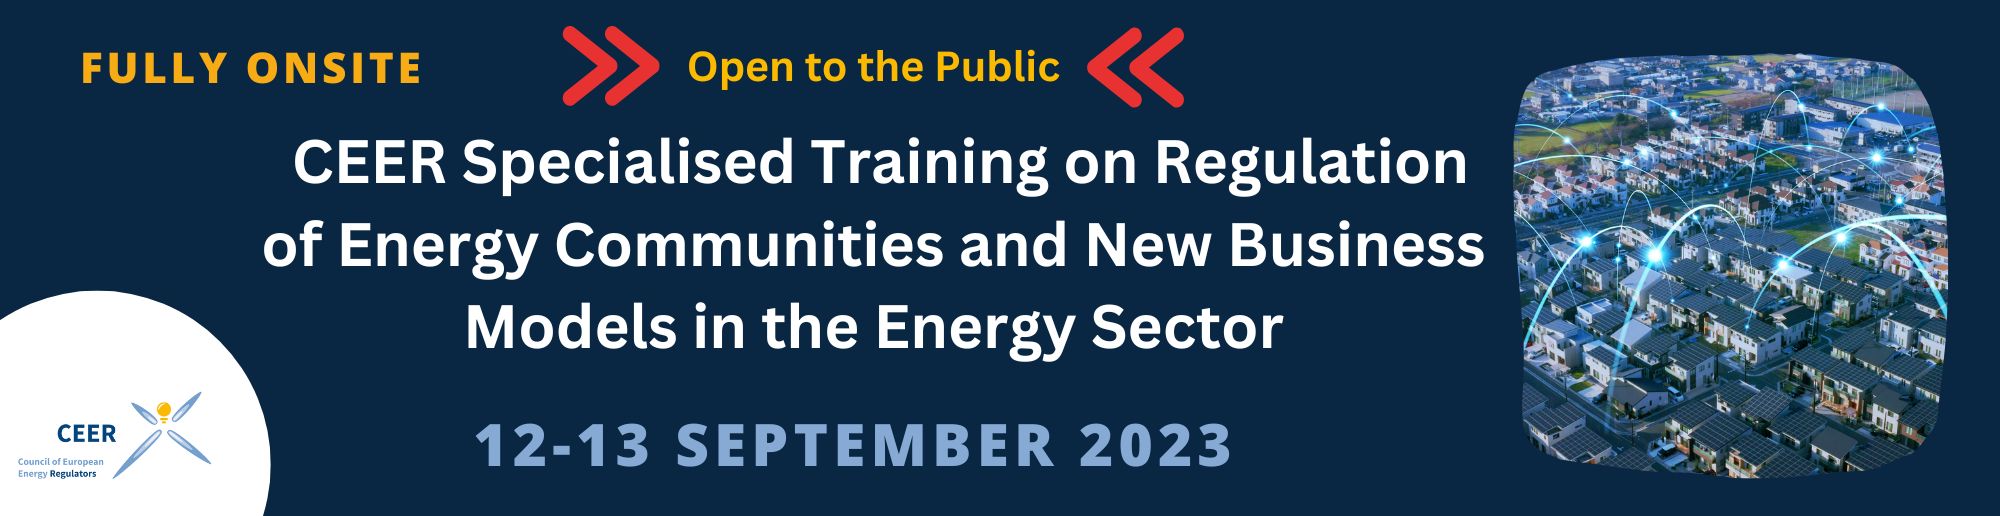 Training on Regulation of Energy Community and New Business Models in the Energy Sector